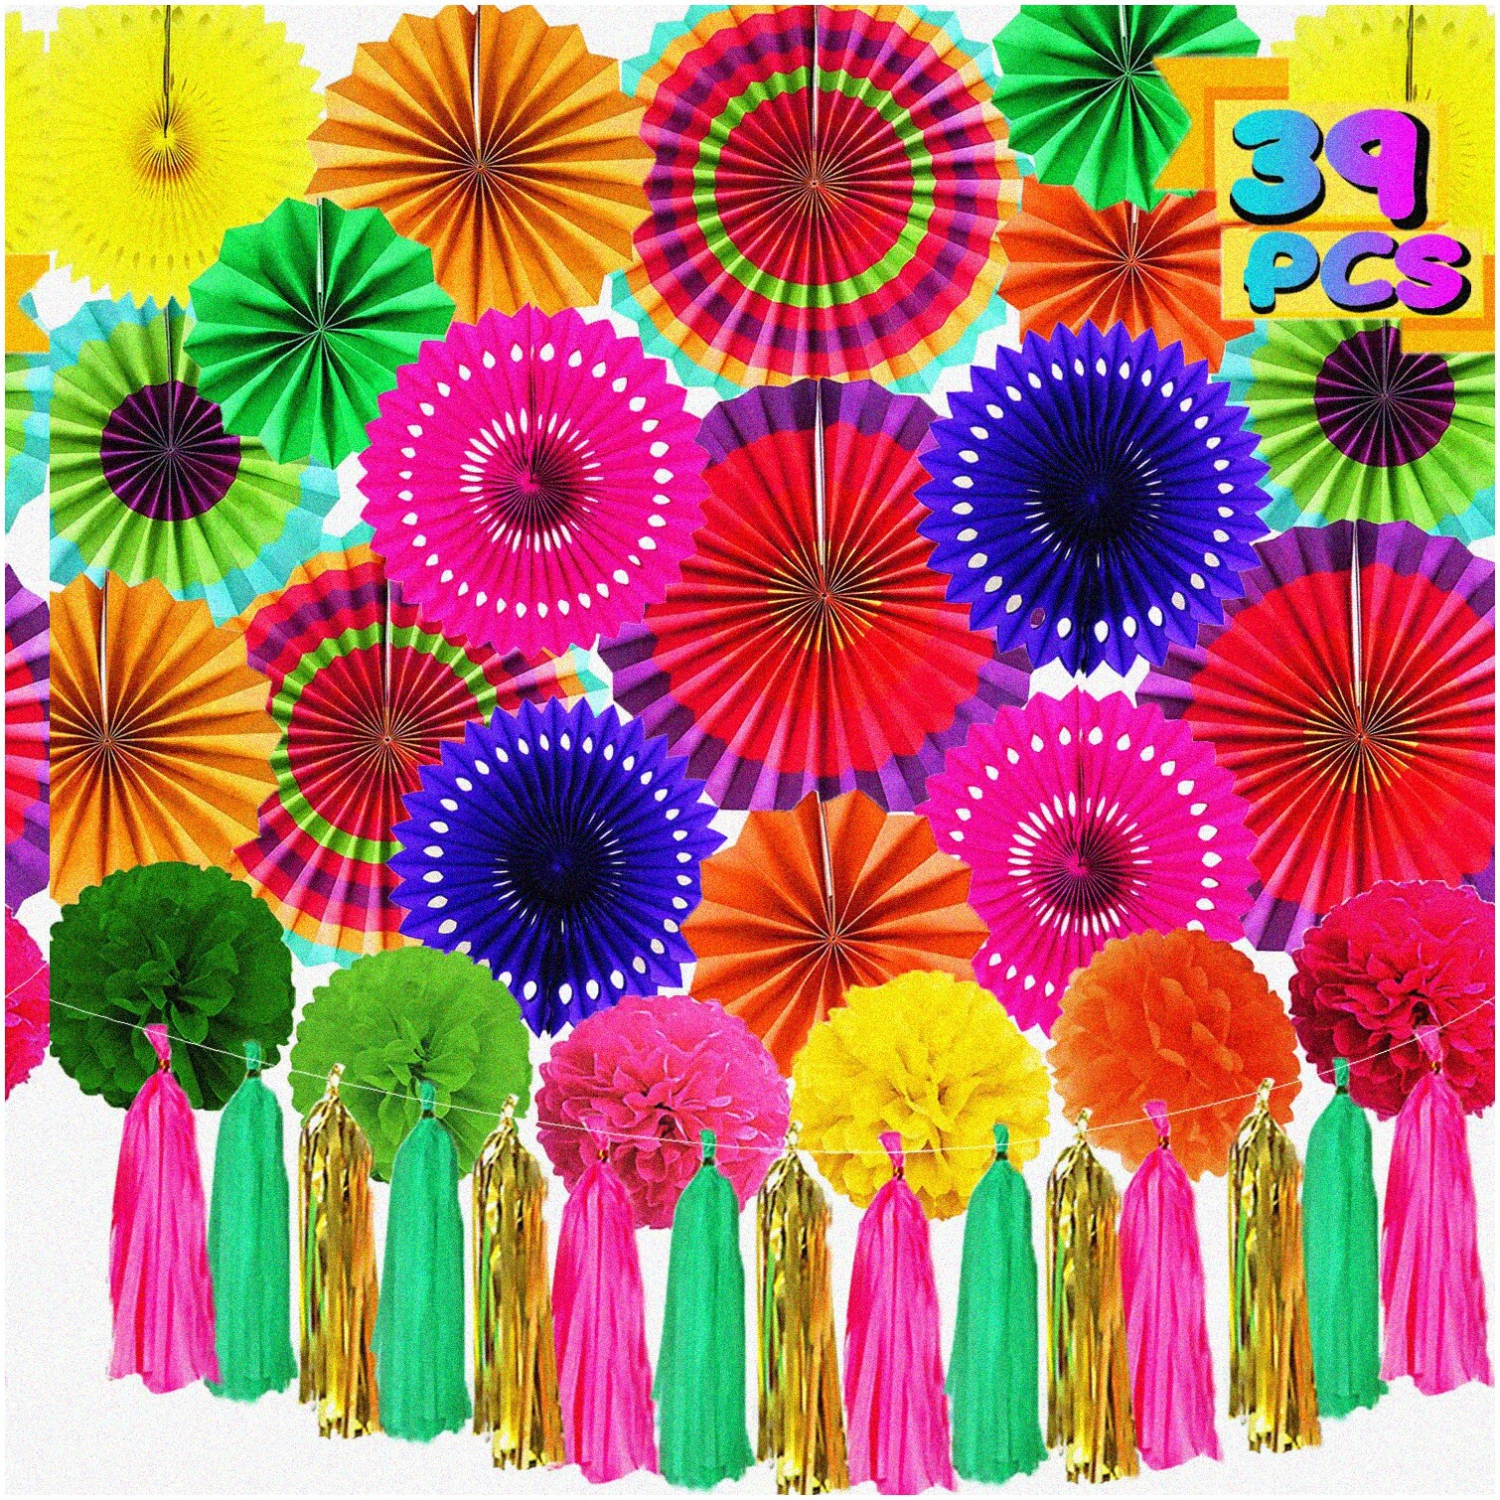 Fiesta Fun Pack: Colorful Hanging Paper Fans & Pom Poms - Mexican Party Decorations, Cinco De Mayo Supplies, Taco Tuesday Luau - 39Pcs for Carnivals, Birthdays & More!